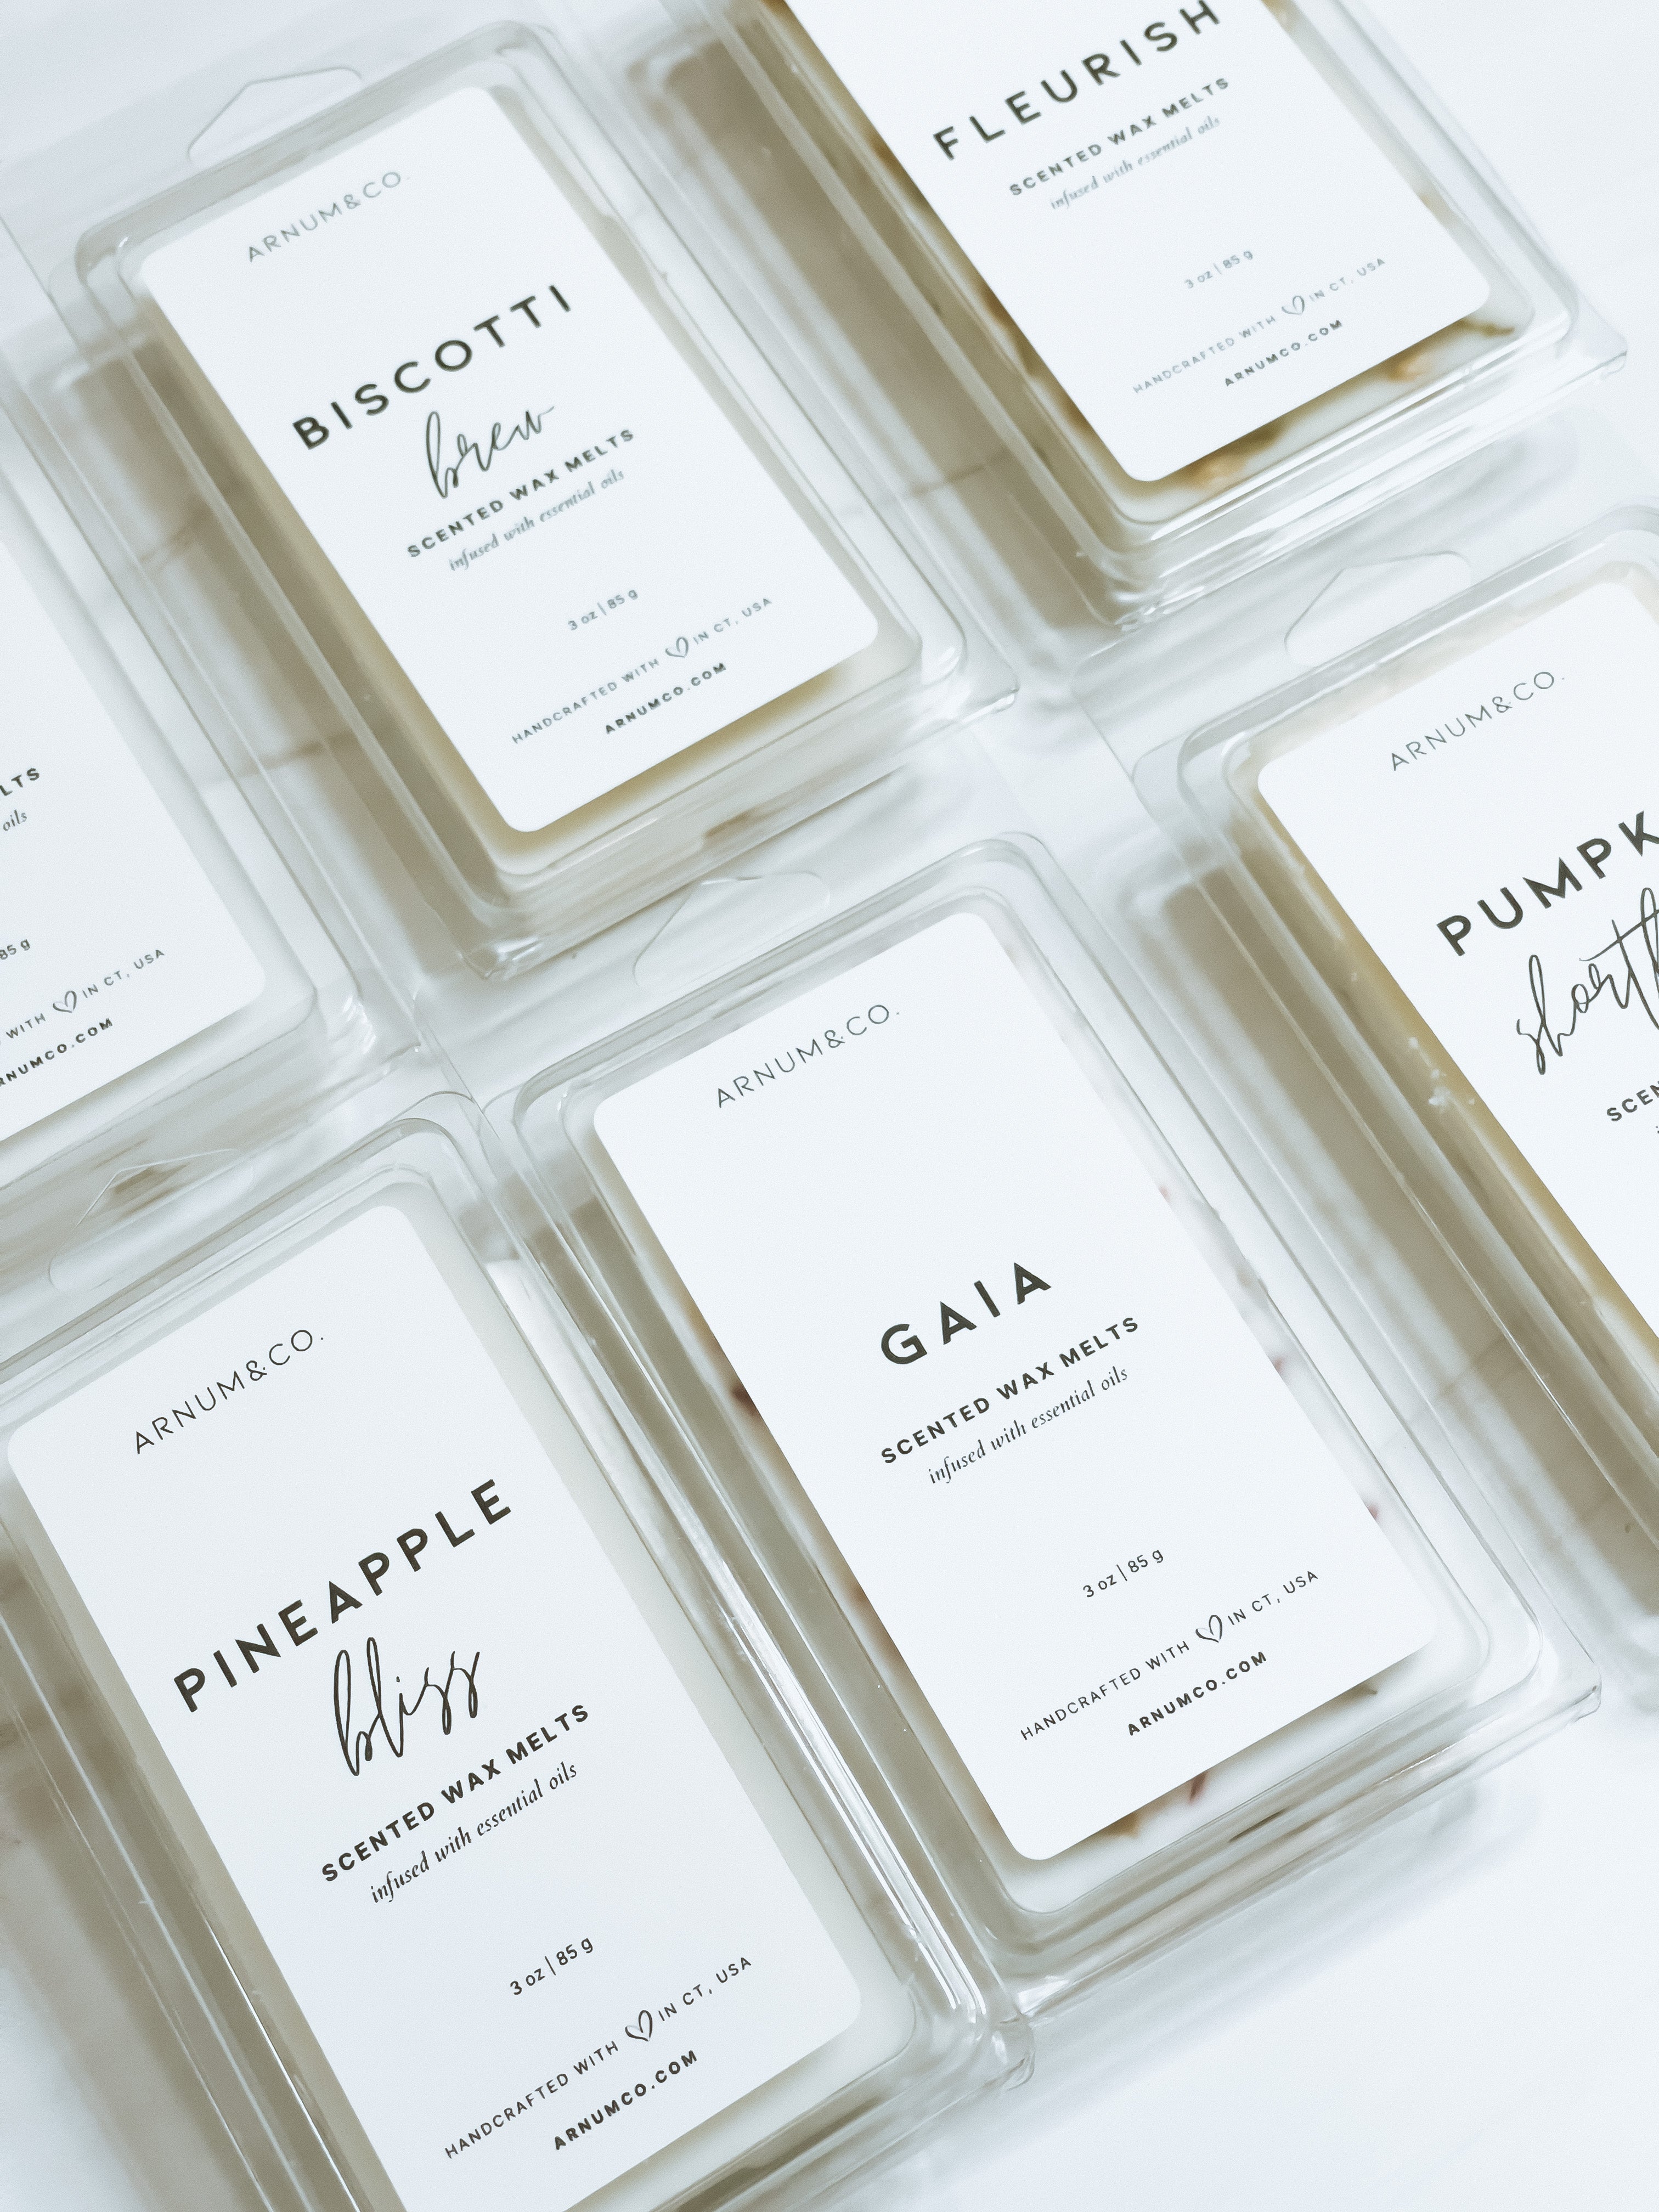 seasonal (limited edition) | scented wax melts